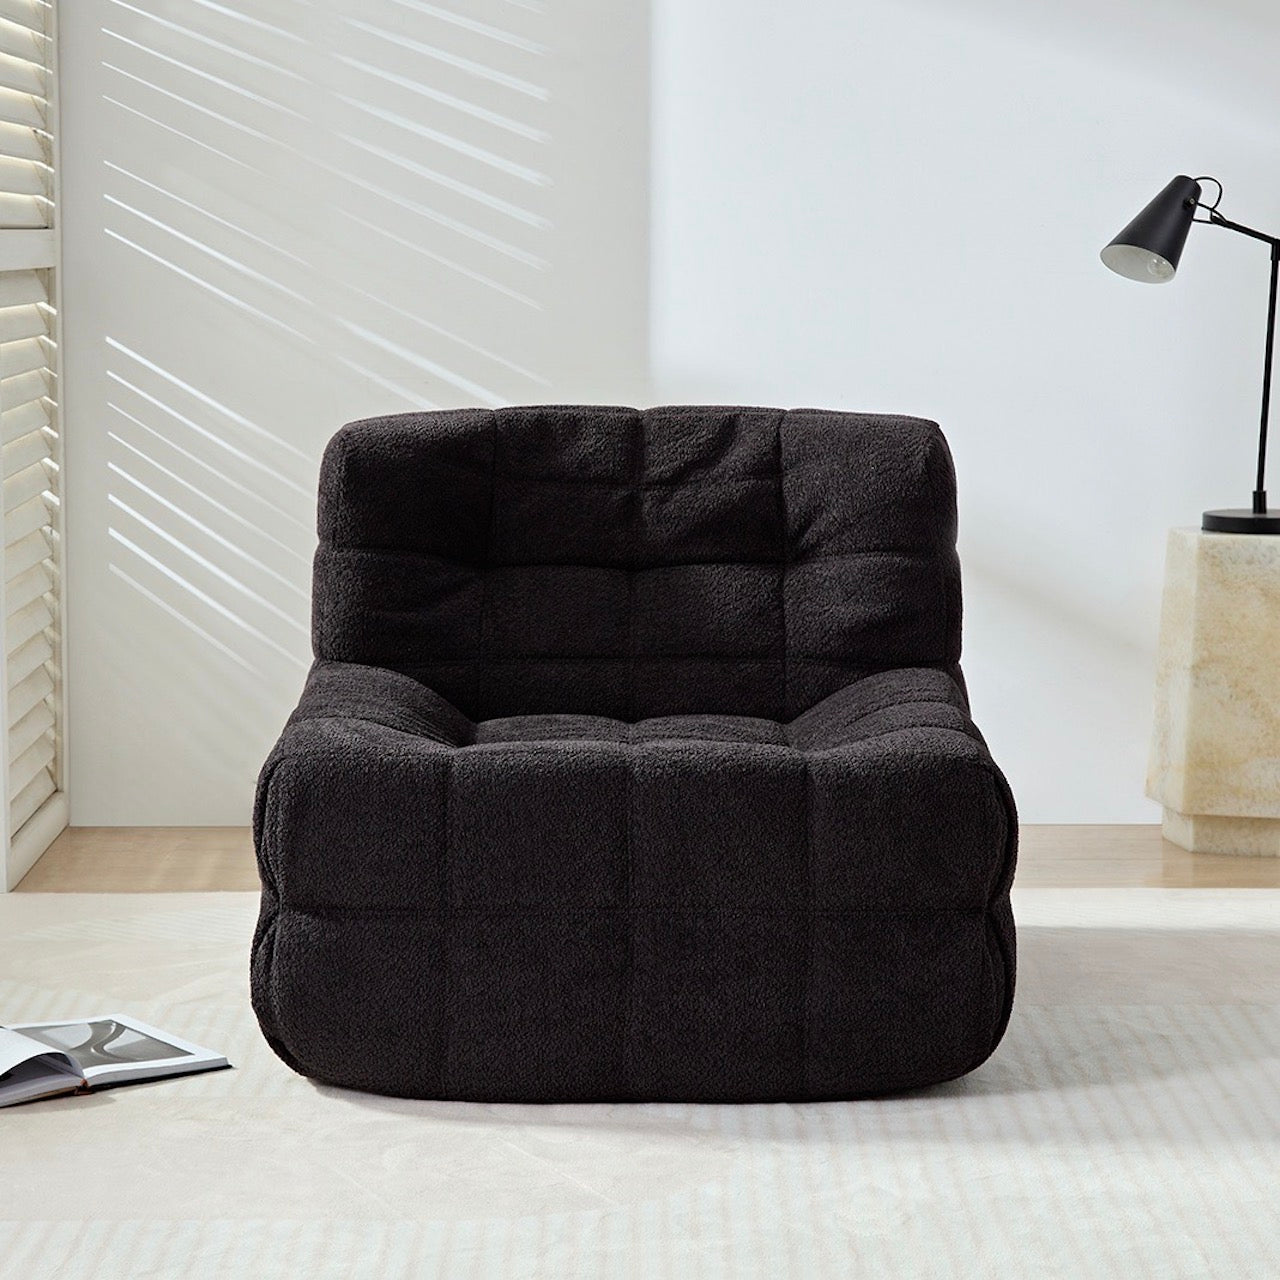 Black corduroy vintage caterpillar lounge chair in a cozy living room setting